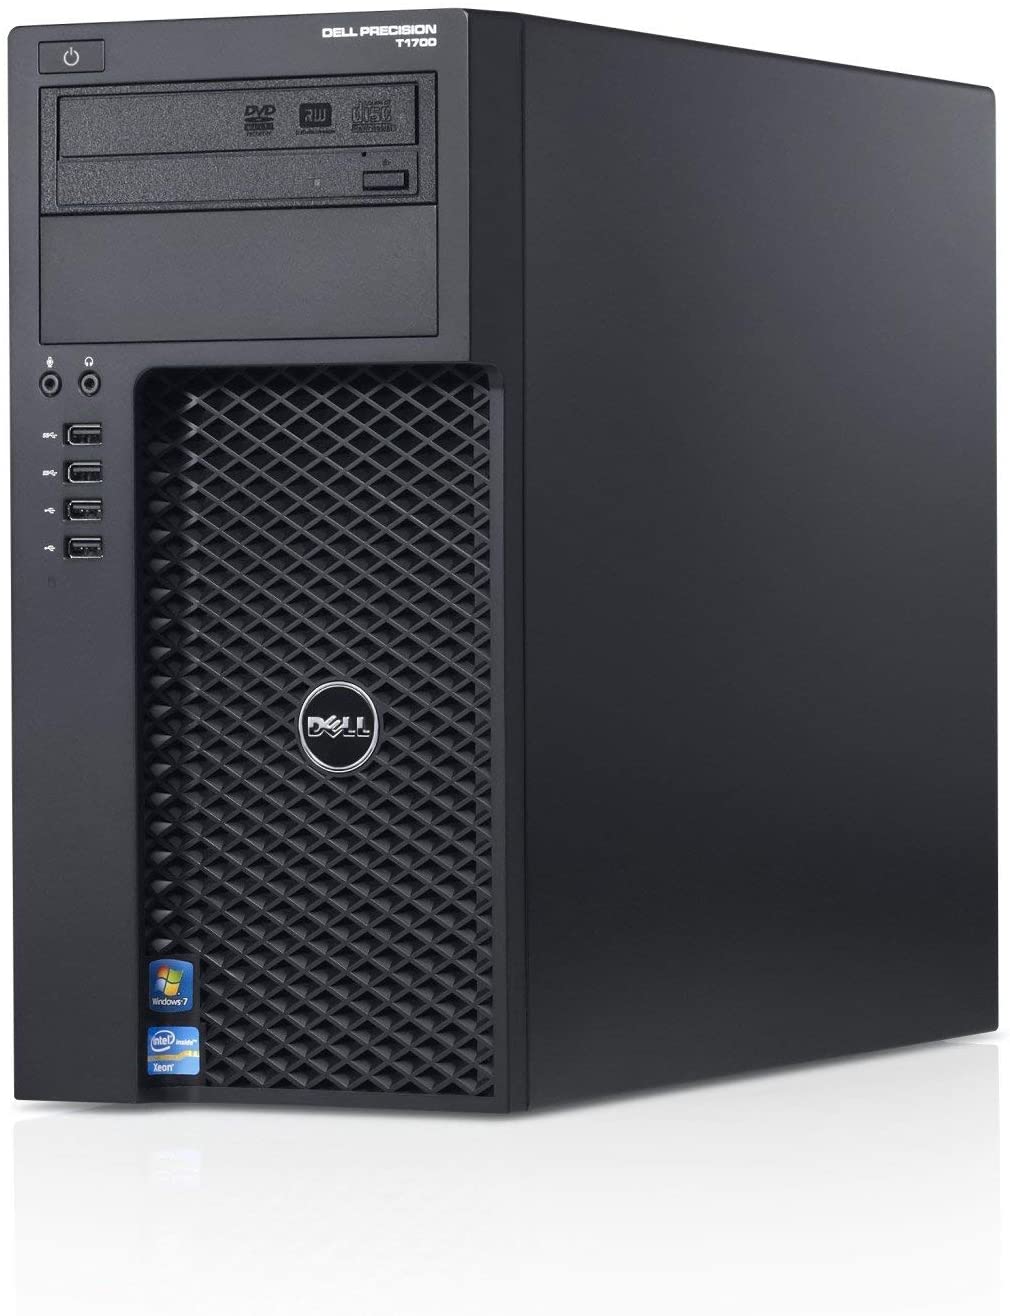 Dell Precision WORKSTATION T1700 Bundle | Intel Core i7-4770 3.4Ghz | Ram 16Gb | SSD 480Gb | Nvidia Quadro NVS 300/310 | AOC I2475PXQU LED IPS Monitor 23.8″ 1920×1080 Pixels Full HD | Wired Mouse and Keyboard Kit